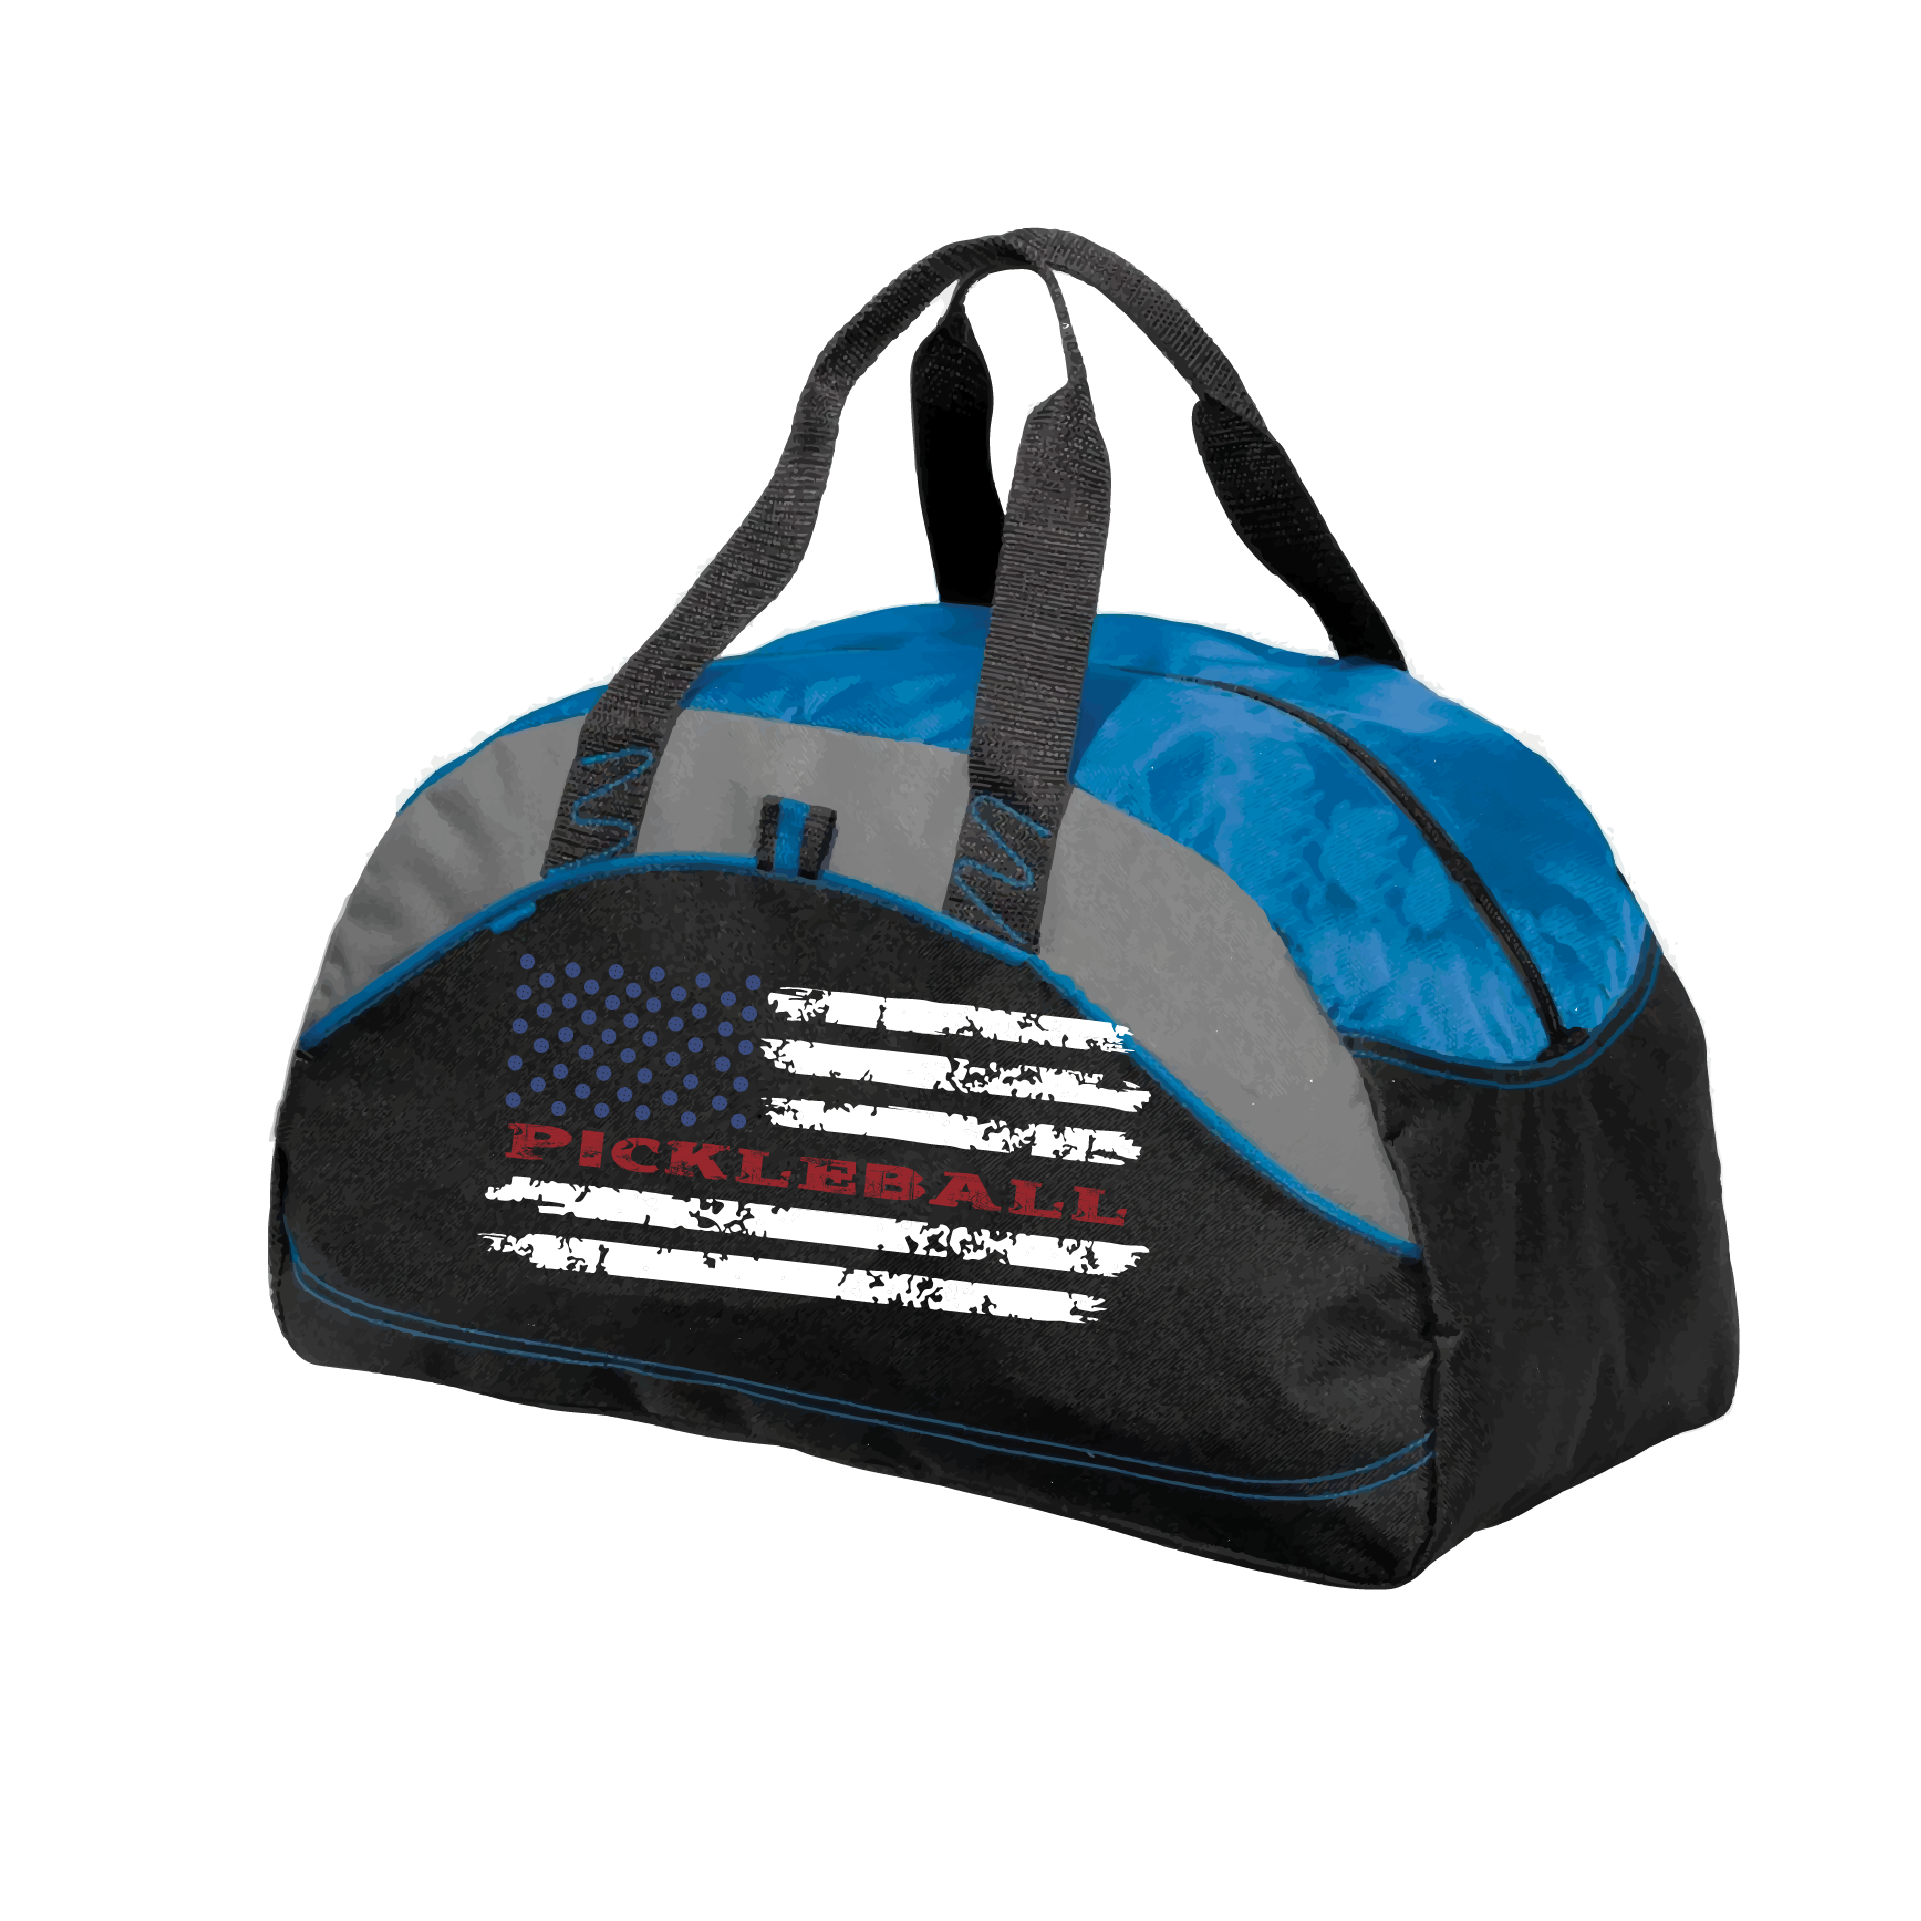 Pickleball Duffel Bag Design: Pickleball Flag  Carry your gear in comfort and style. This fun pickleball duffel bag is the perfect accessory for all pickleball players needing to keep their gear in one place. This medium sized duffel tote is ideal for all your pickleball activities. The large center compartment allows for plenty of space and the mesh end pocket is perfect for holding a water bottle. 